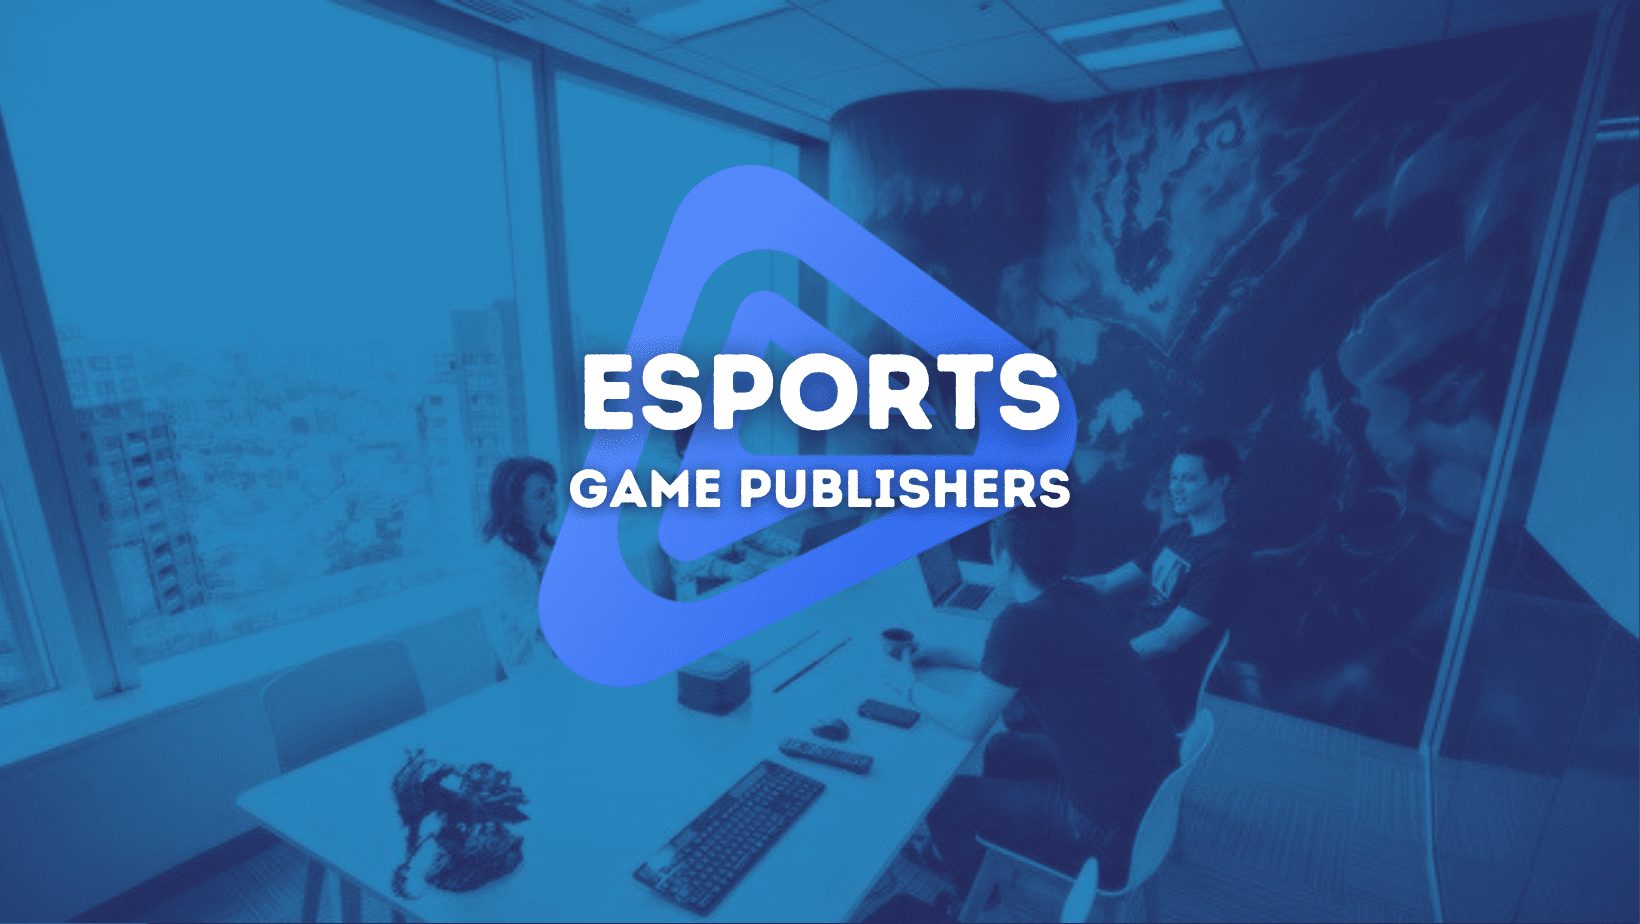 The biggest esports game publishers